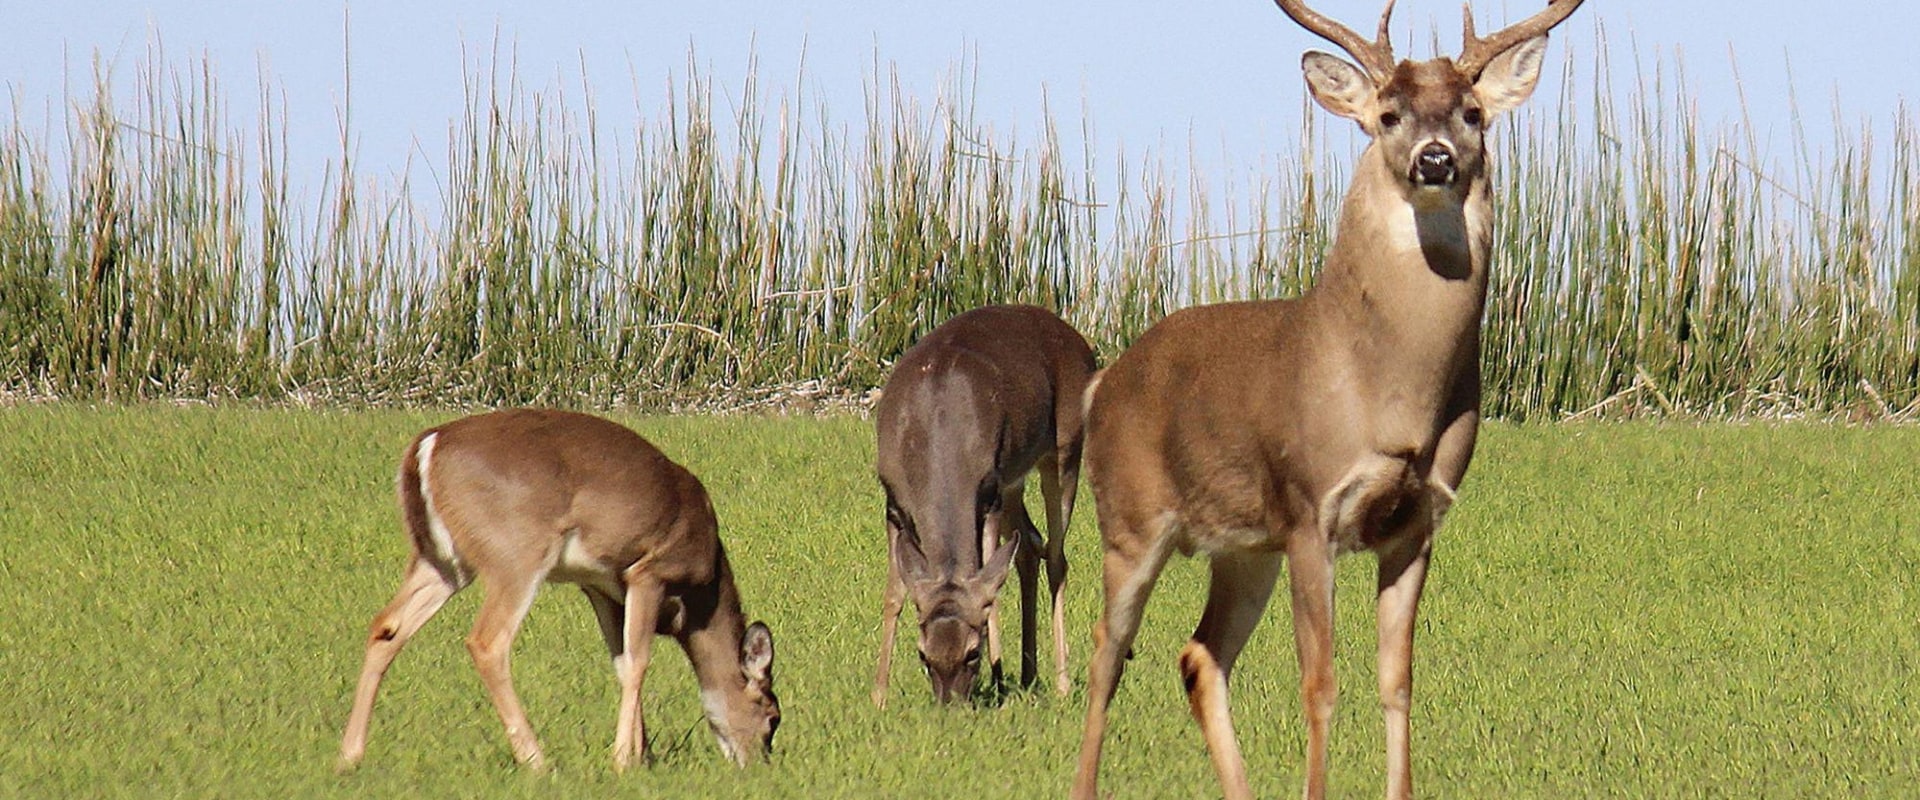 Is wild venison safe to eat?